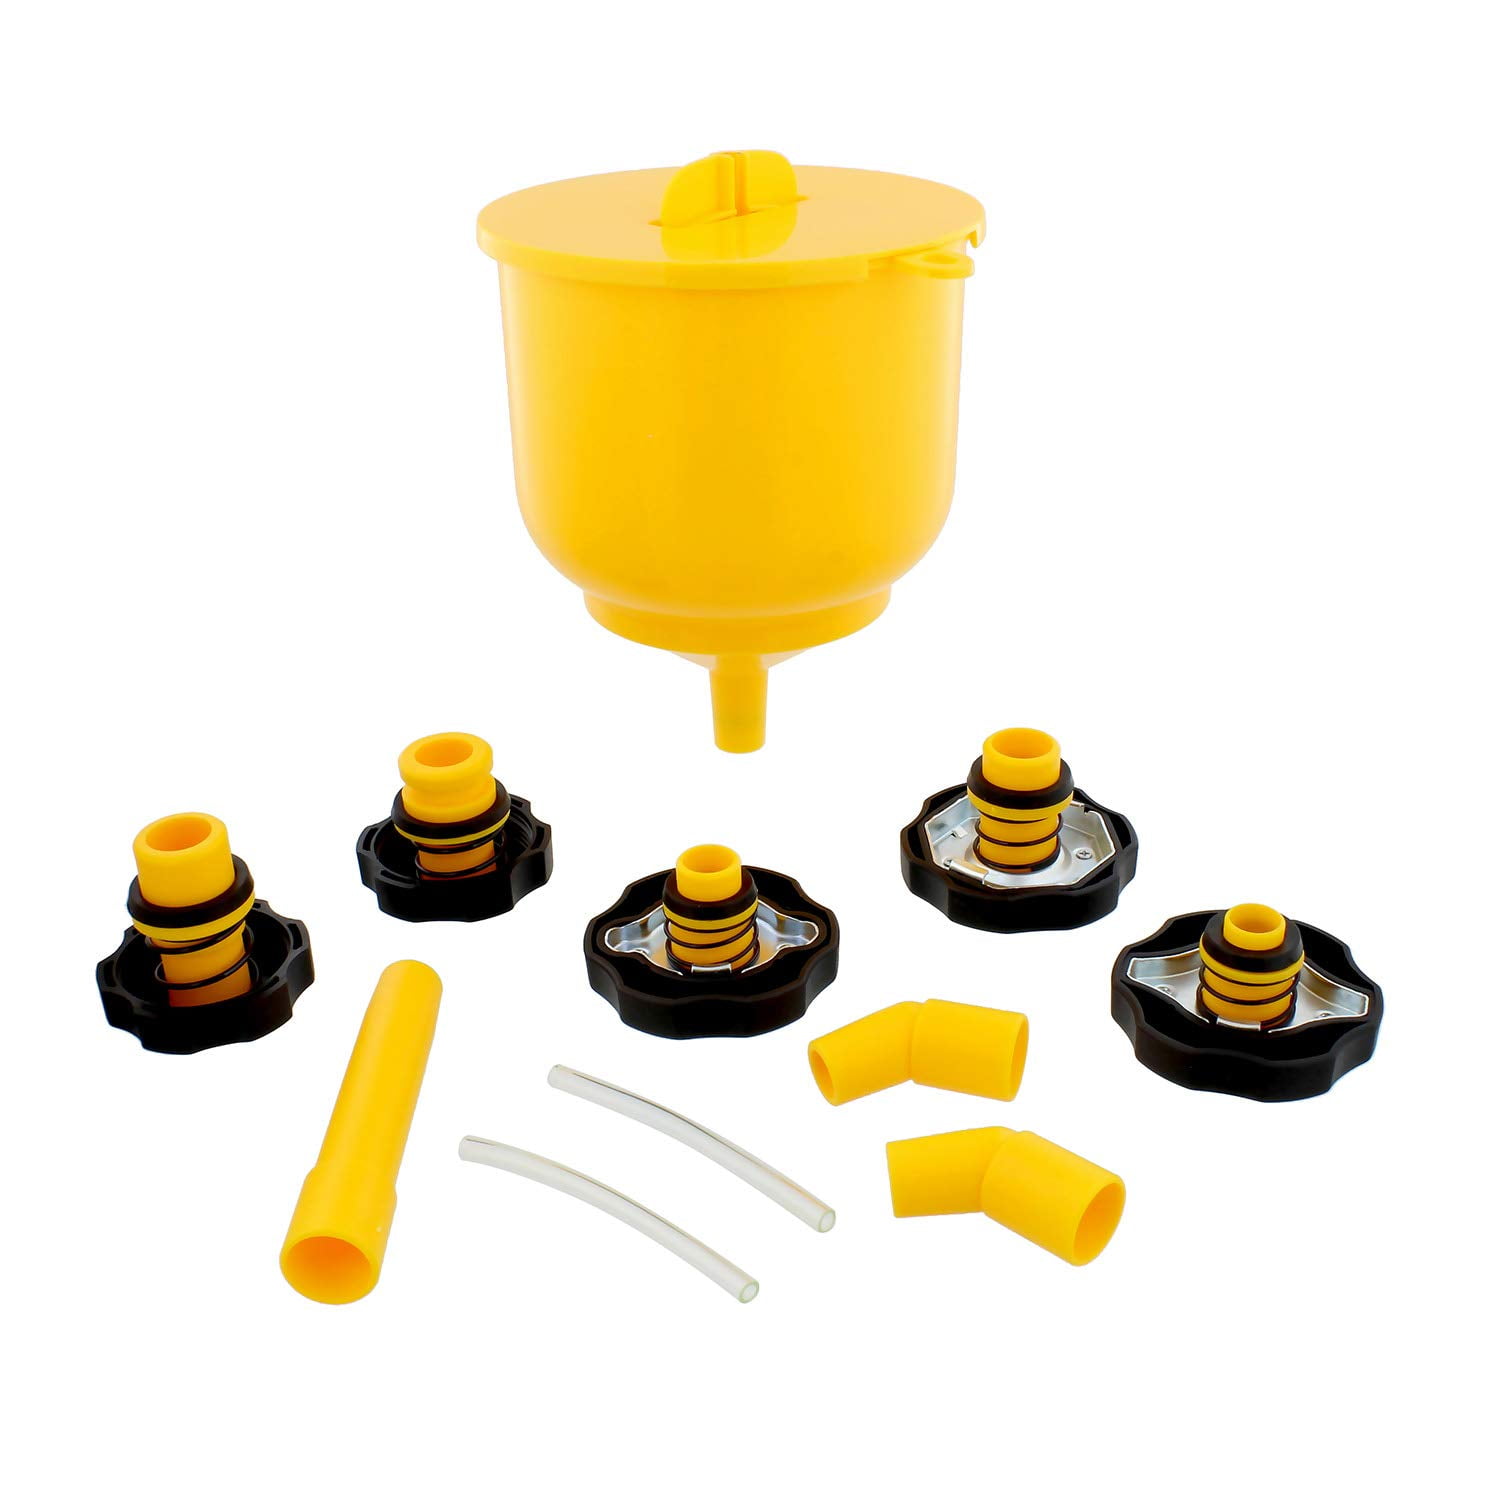 ARES 71502 Spill Proof Coolant Filling Kit Eliminates Trapped Air Pockets and Squeaky Belts Due to Overflow 